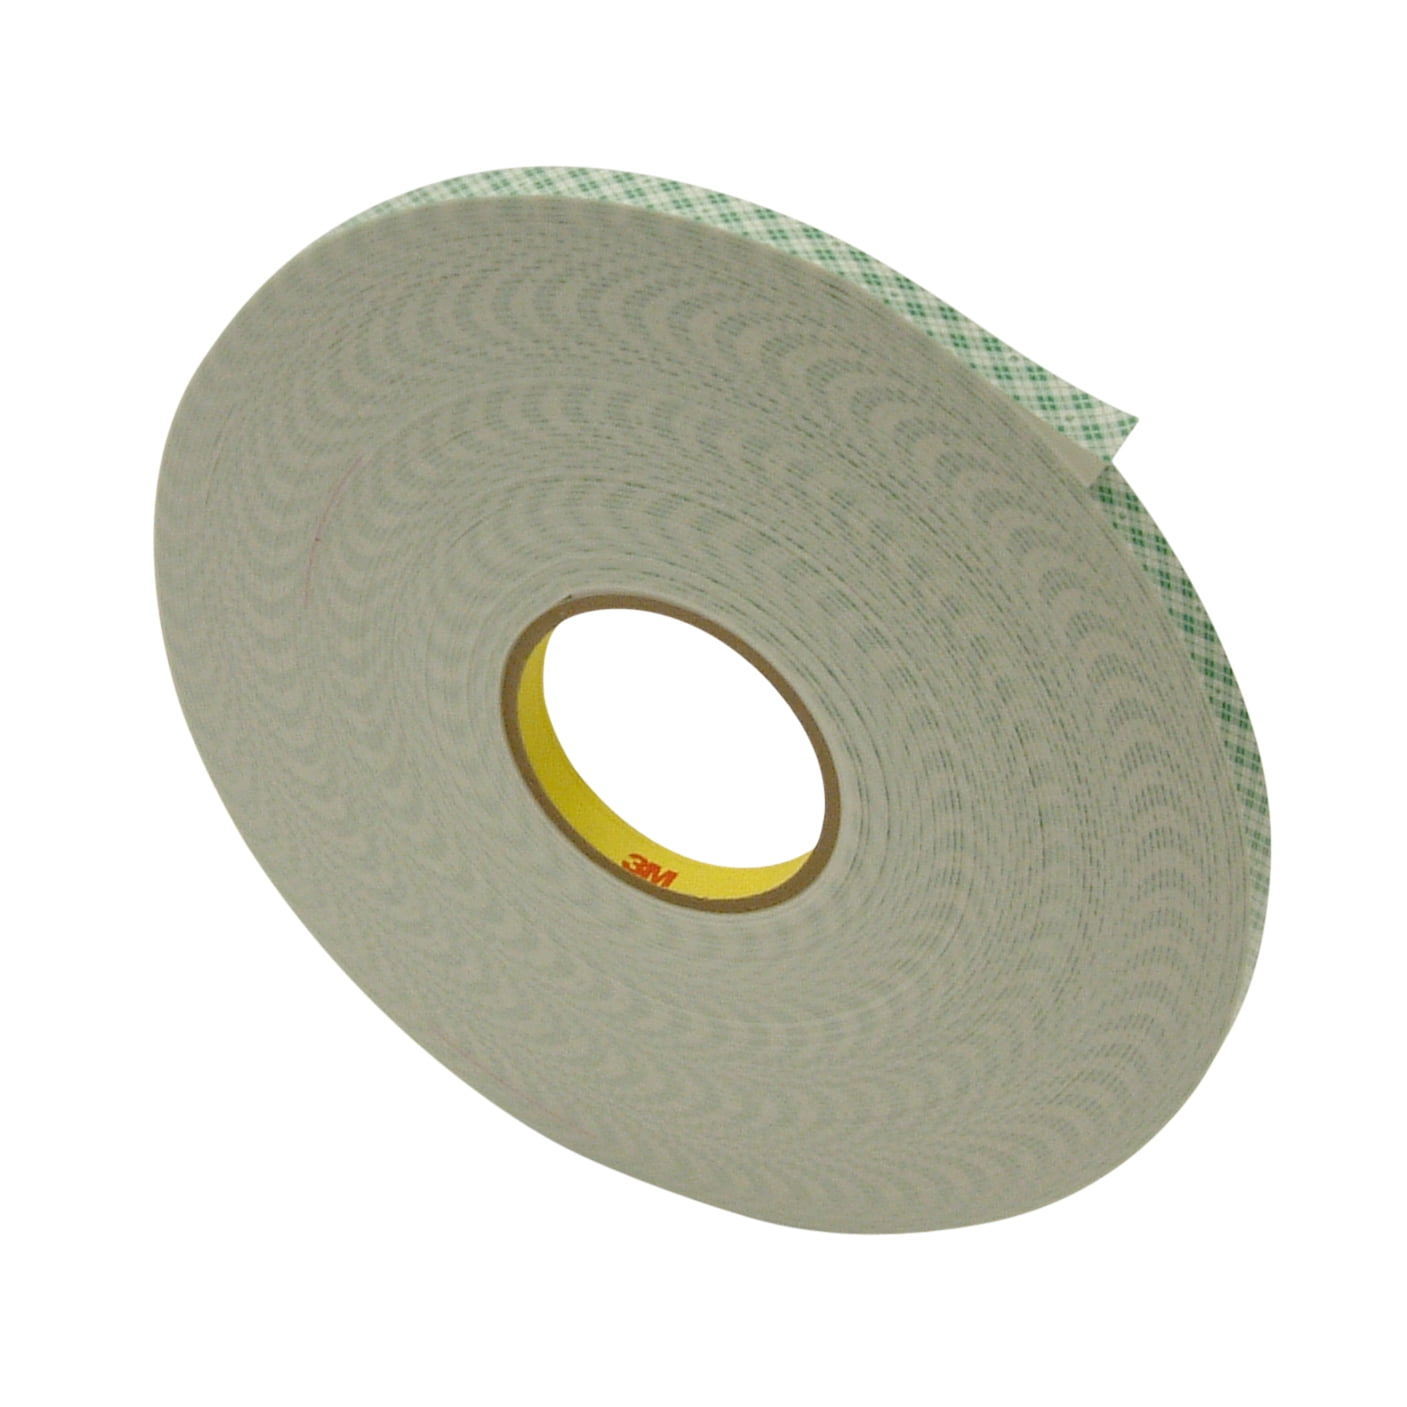 3M™ Double Coated Urethane Foam Tape 4016 Off-White 1 in x 36 yd 1/16 in 